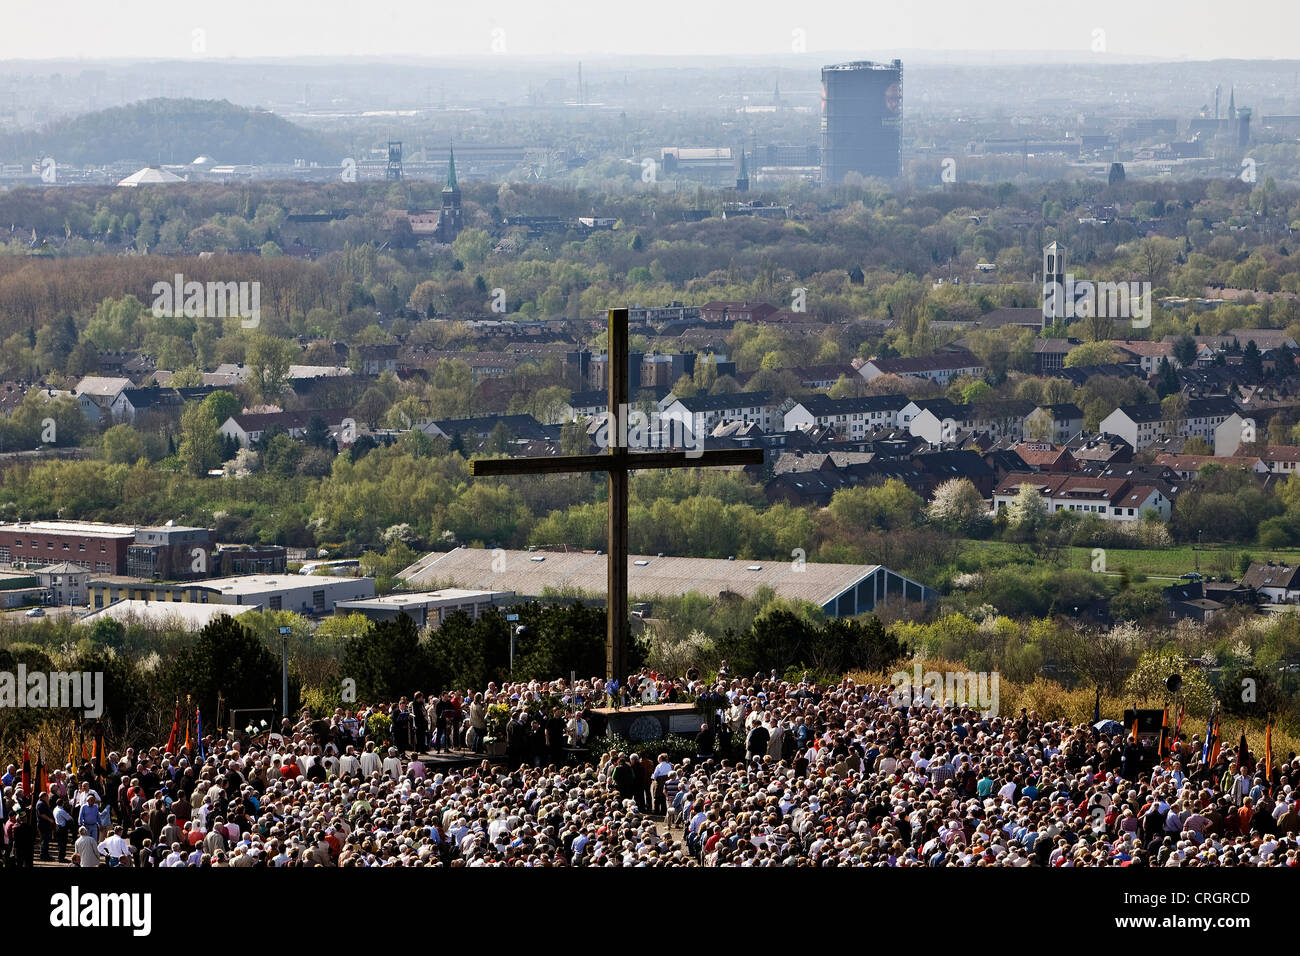 many people taking part in a mass on stockpile Haniel, in the background a gasometer, Germany, North Rhine-Westphalia, Bottrop Stock Photo